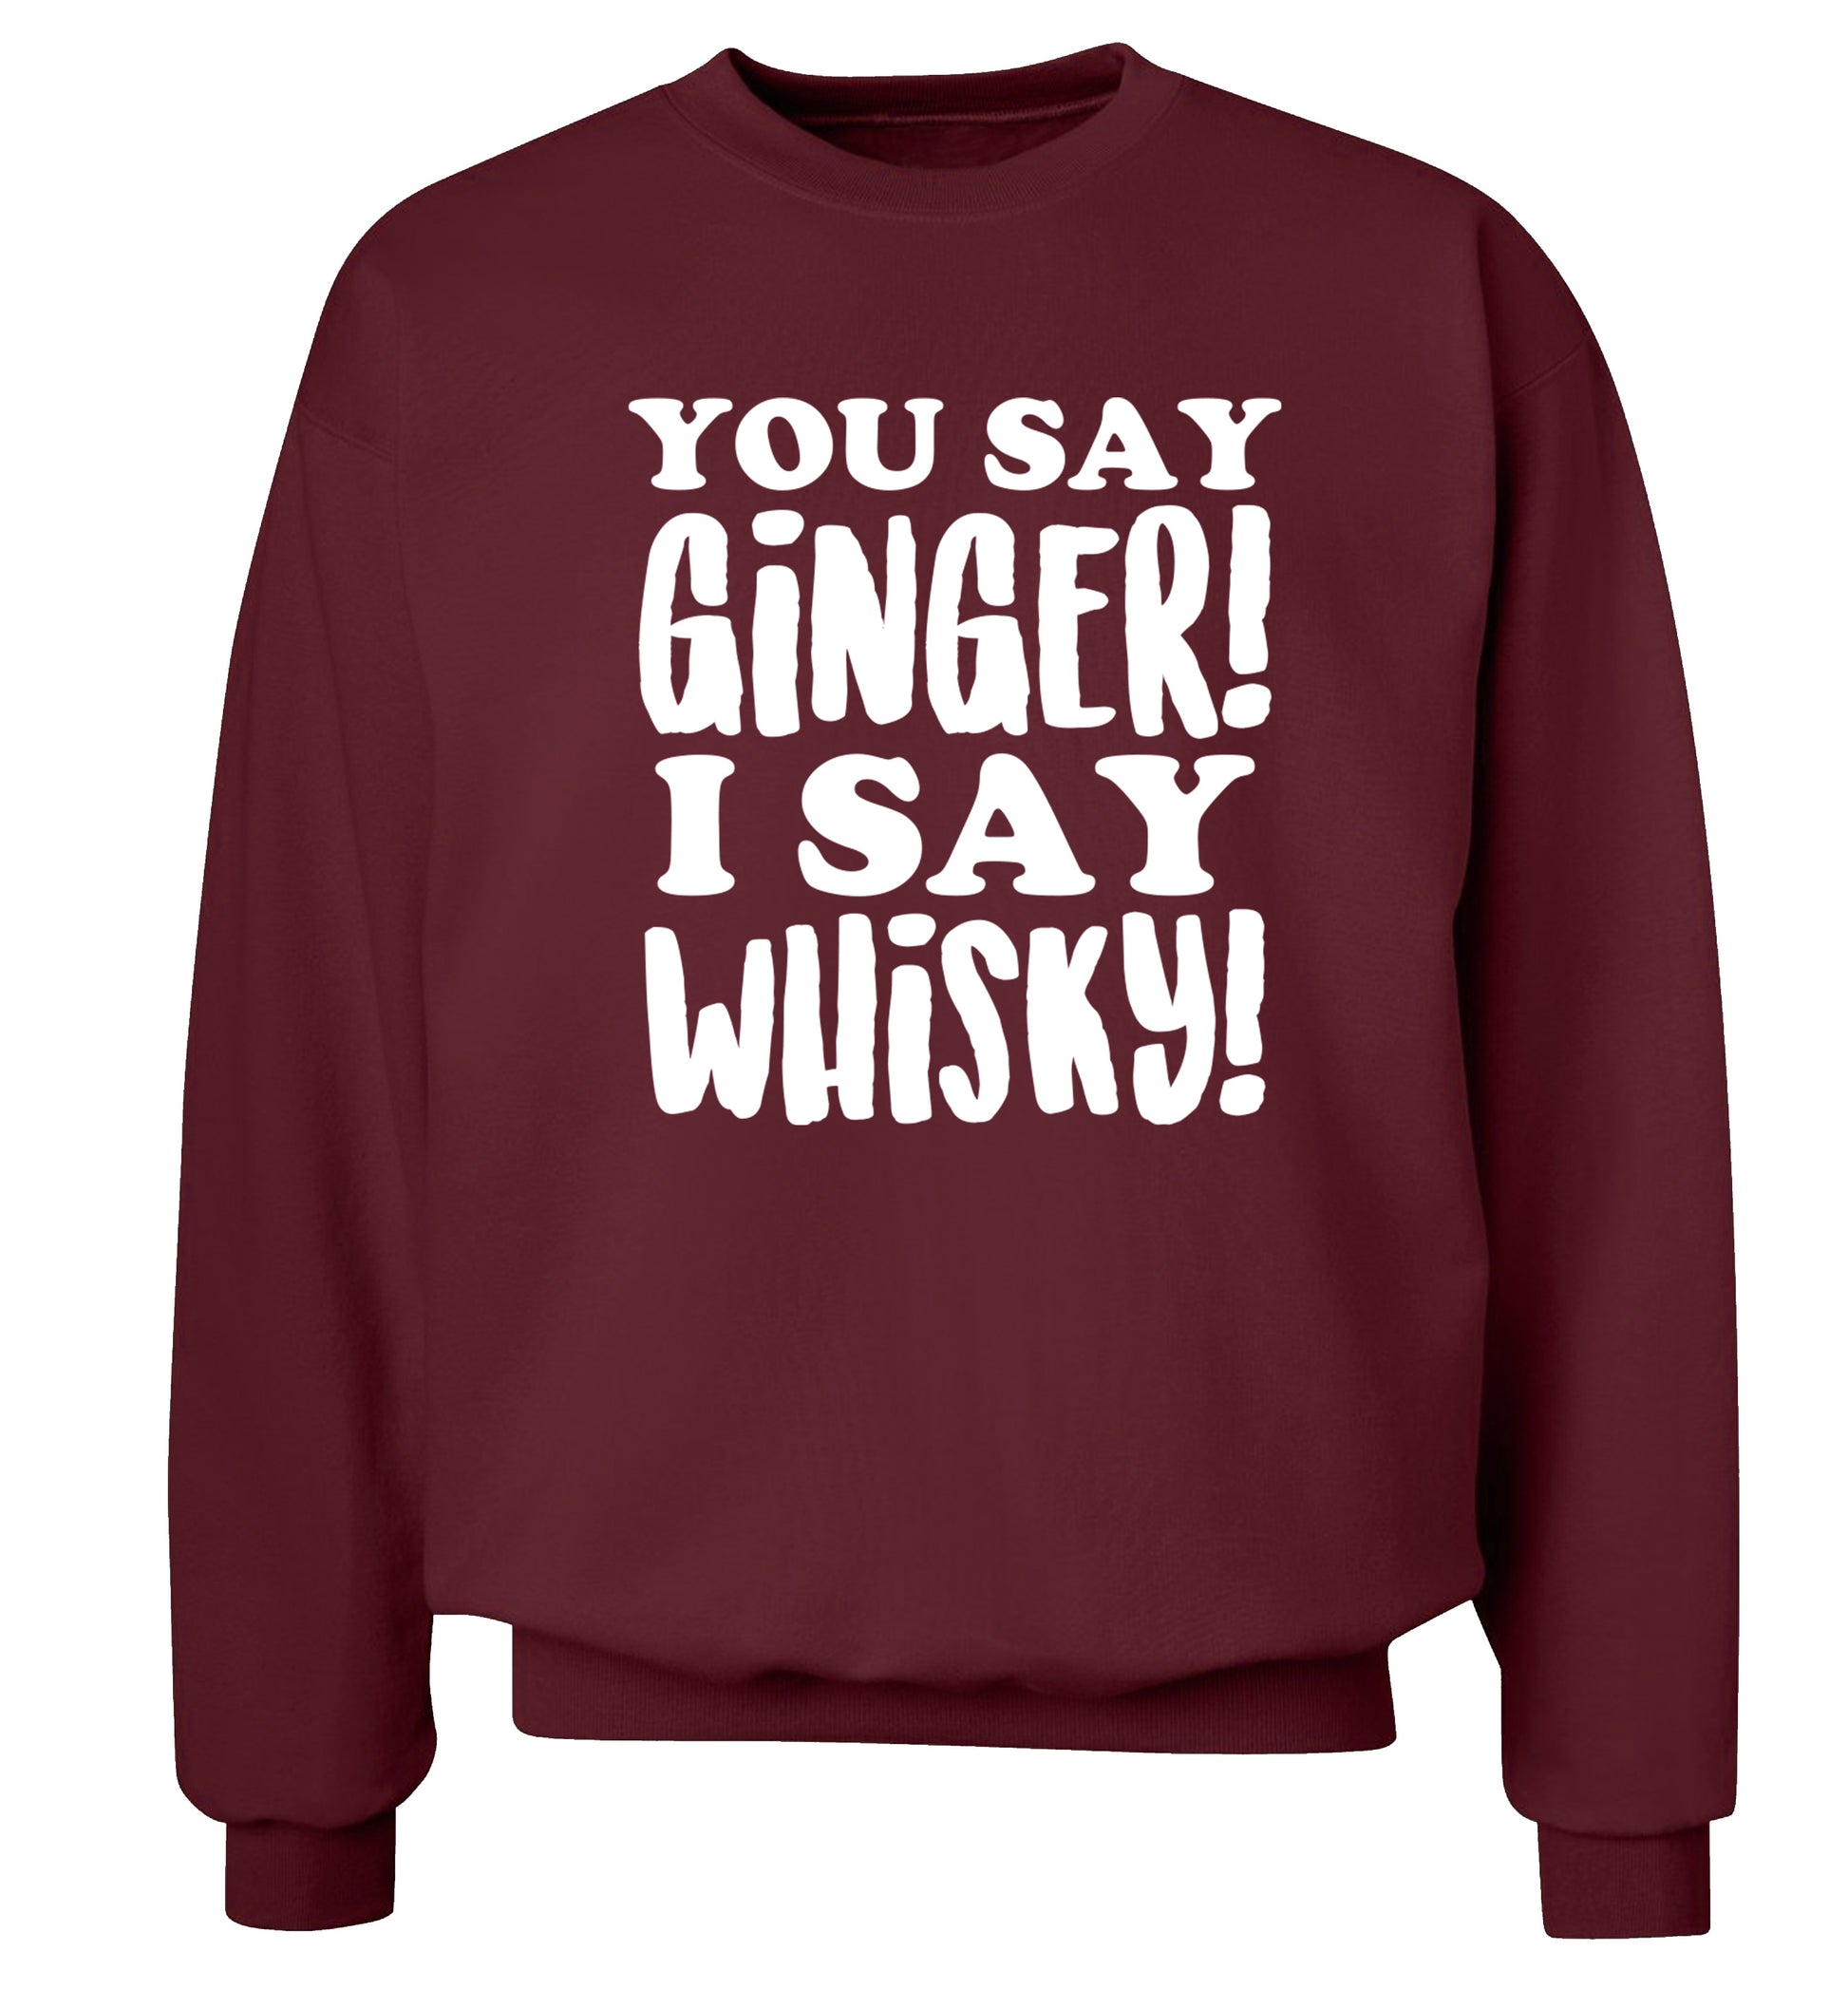 You say ginger I say whisky! Adult's unisex maroon Sweater 2XL